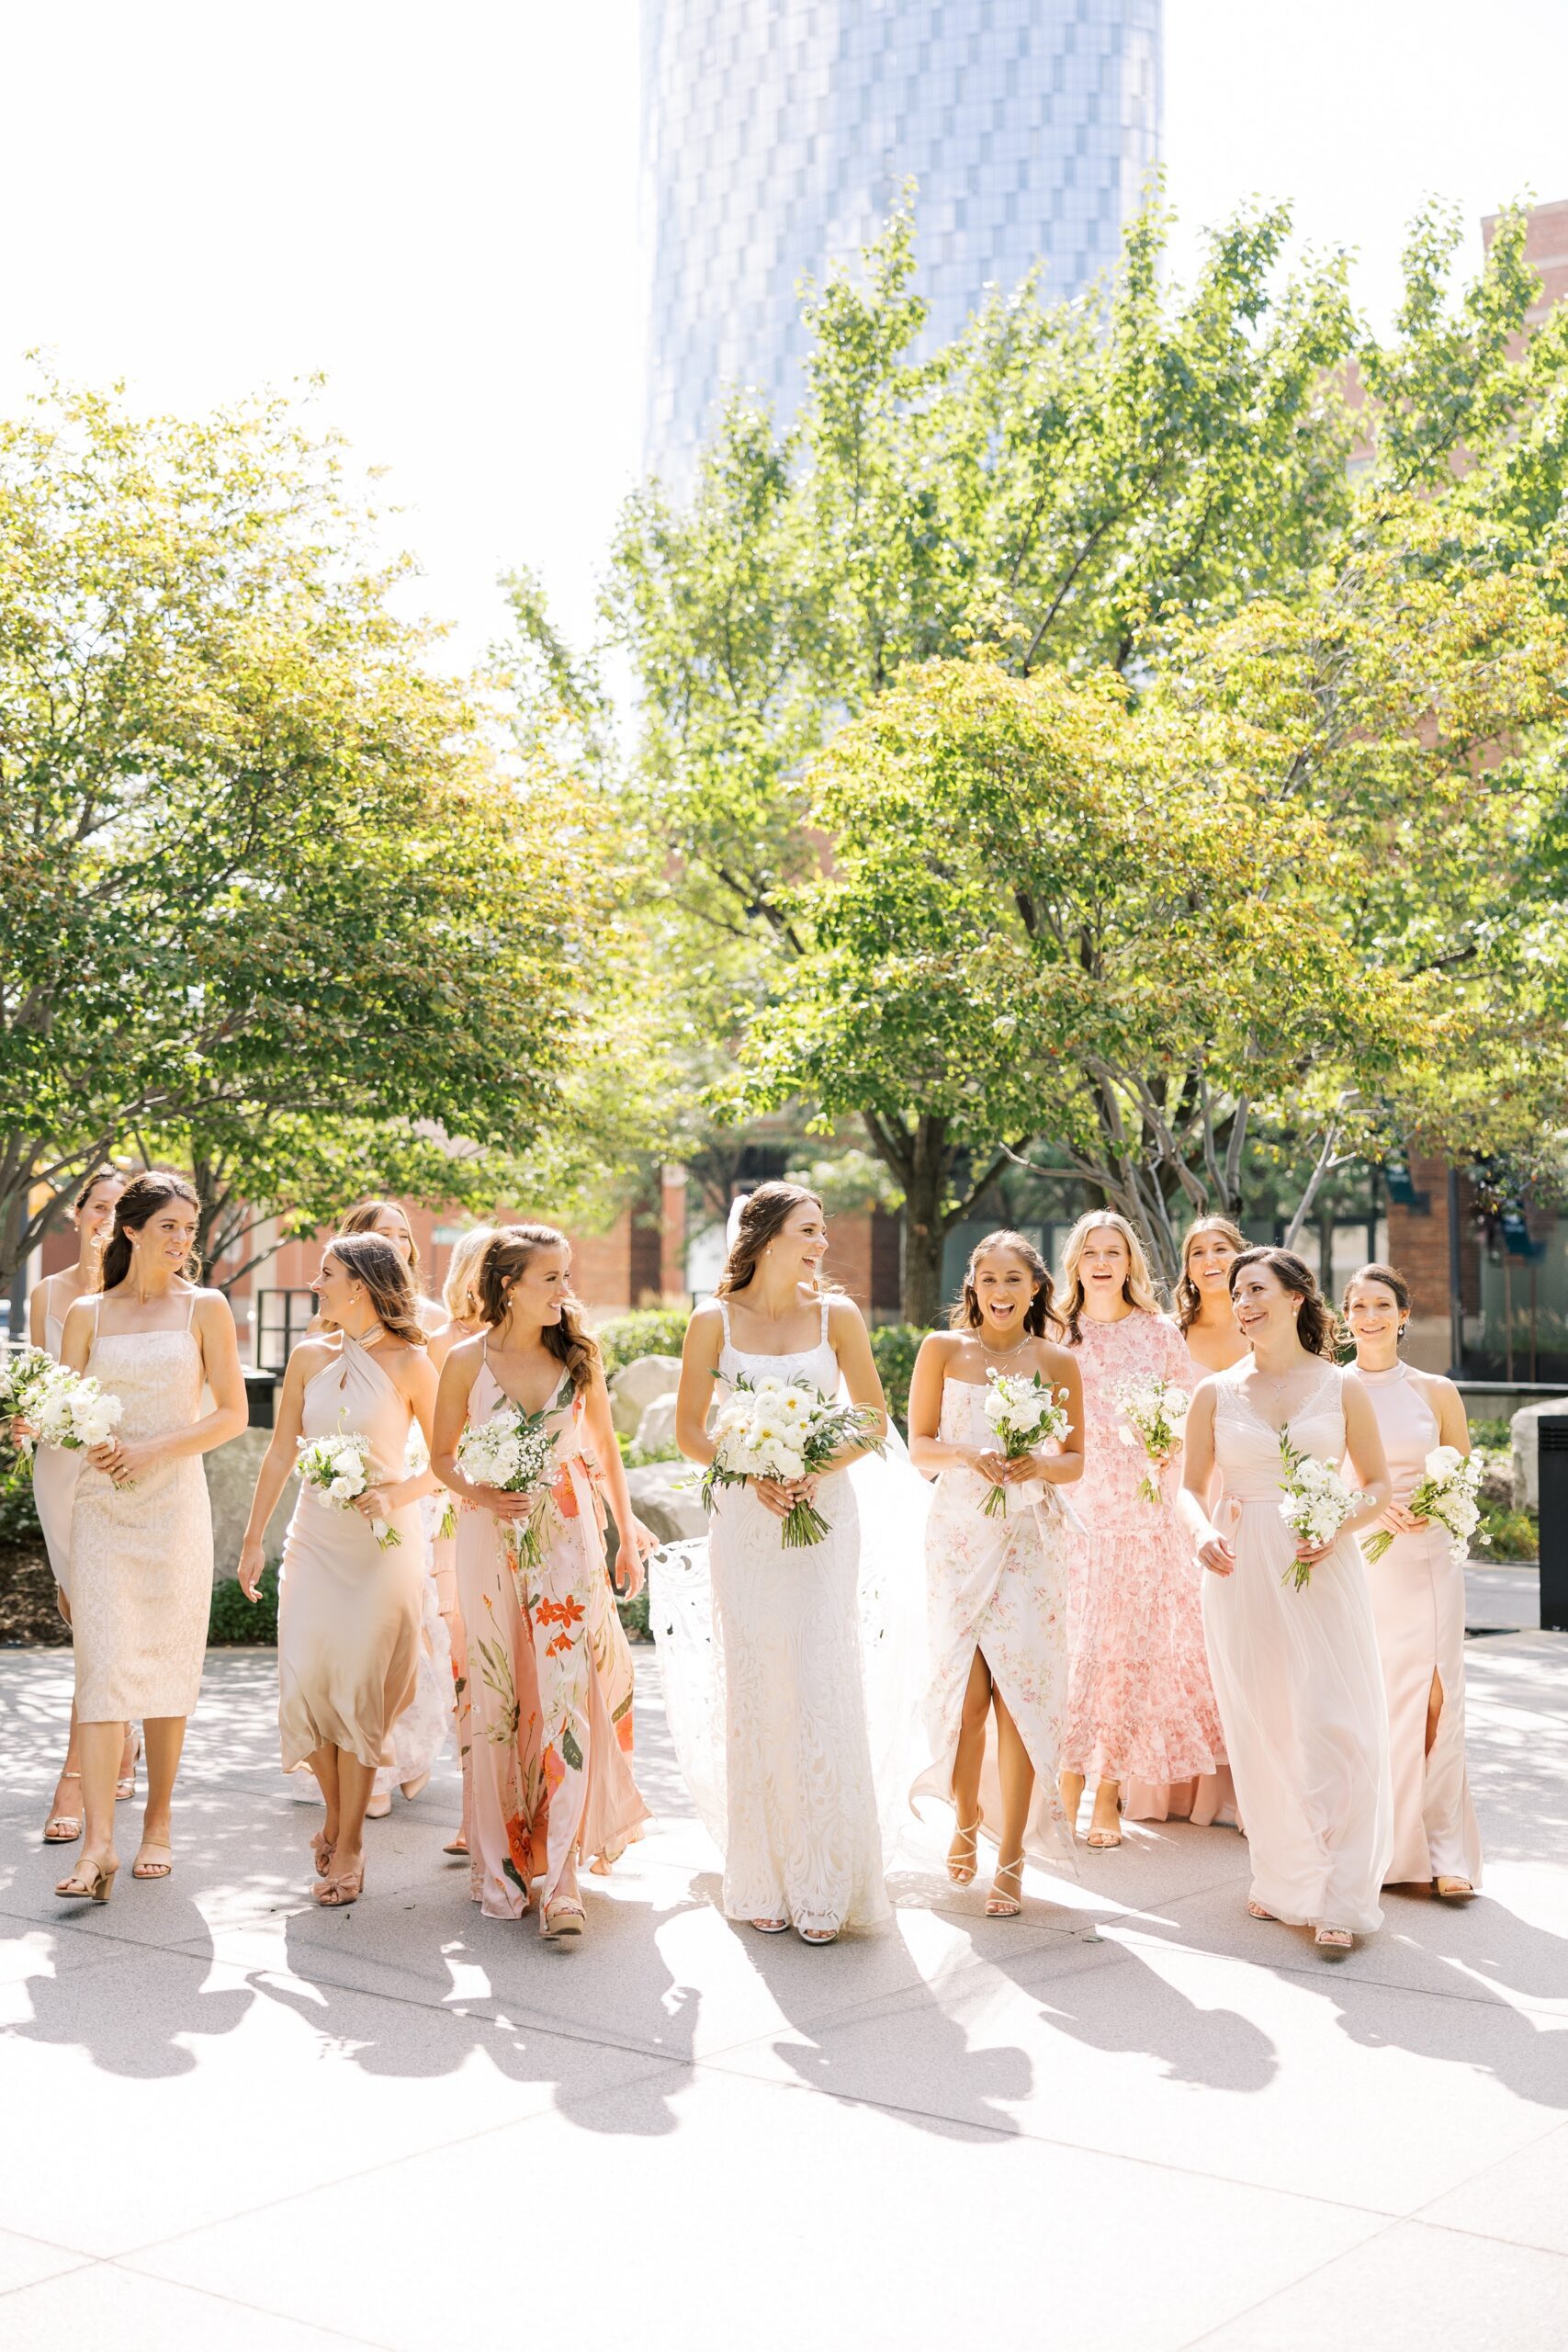 bride and bridesmaids wearing mismatched dresses before galleria Marchetti wedding